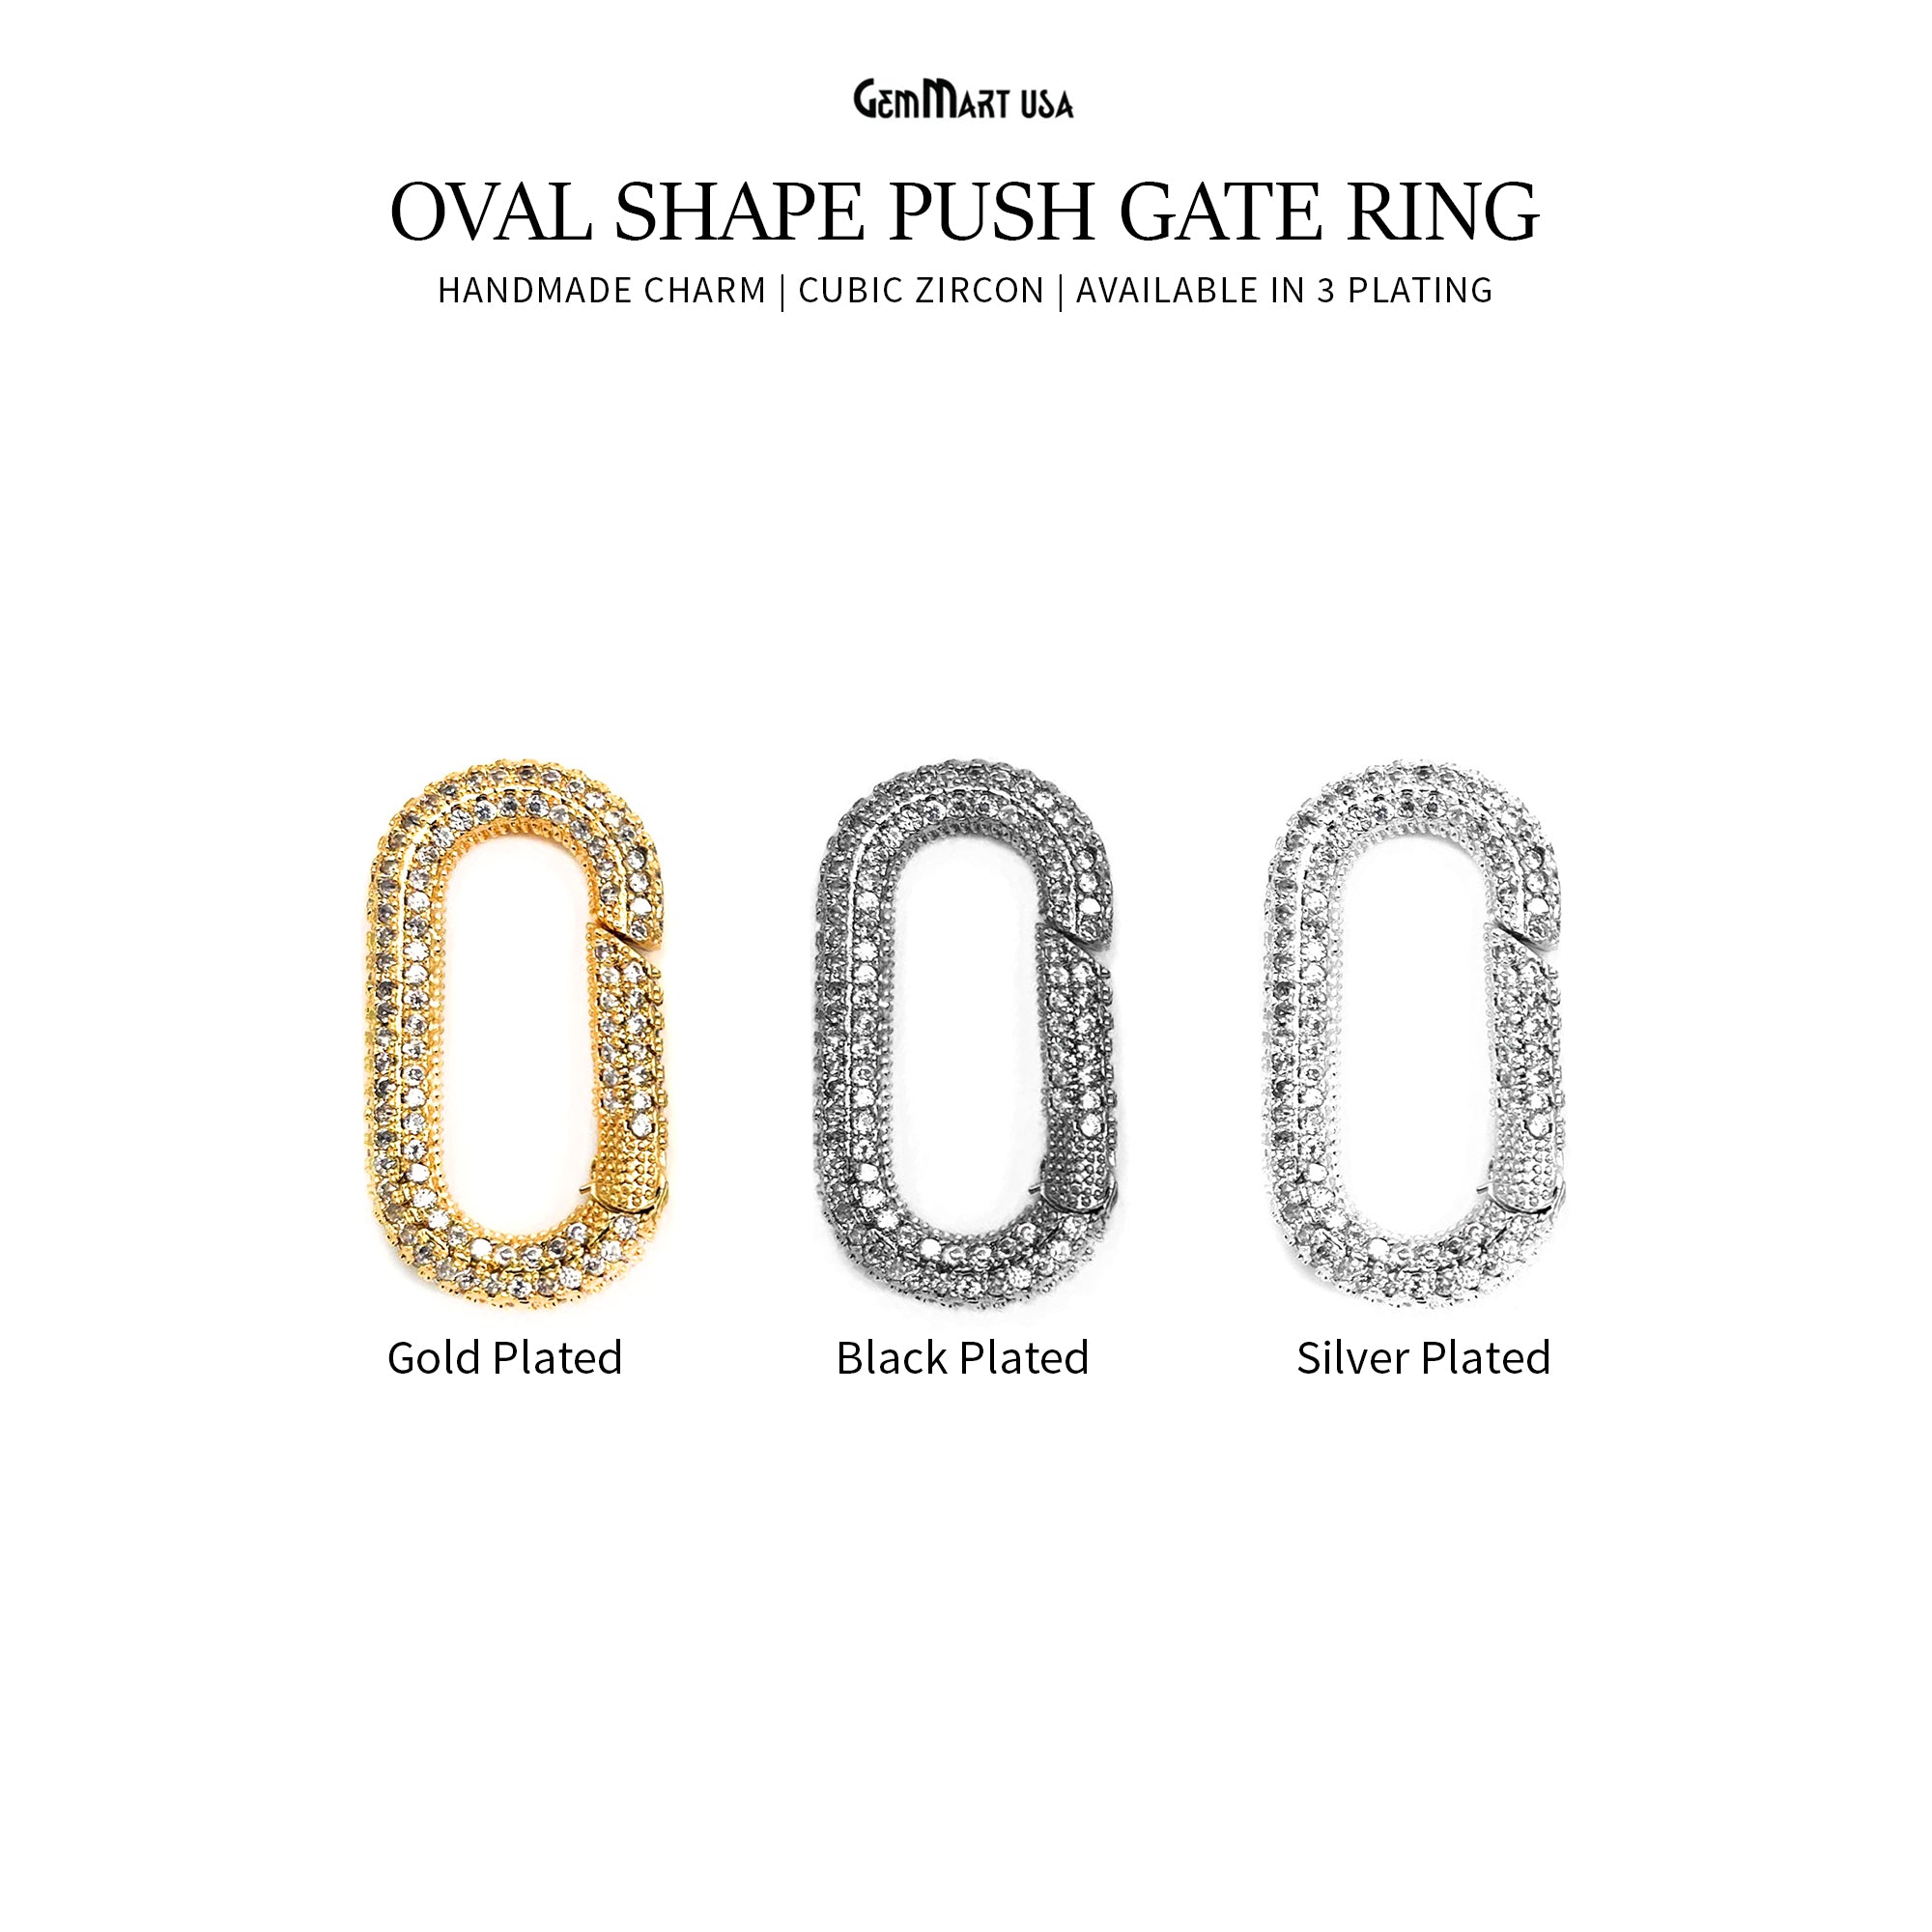 Dainty Gold Spring Gate Ring-Oval Push Gate Ring-Jewelry Making Findings